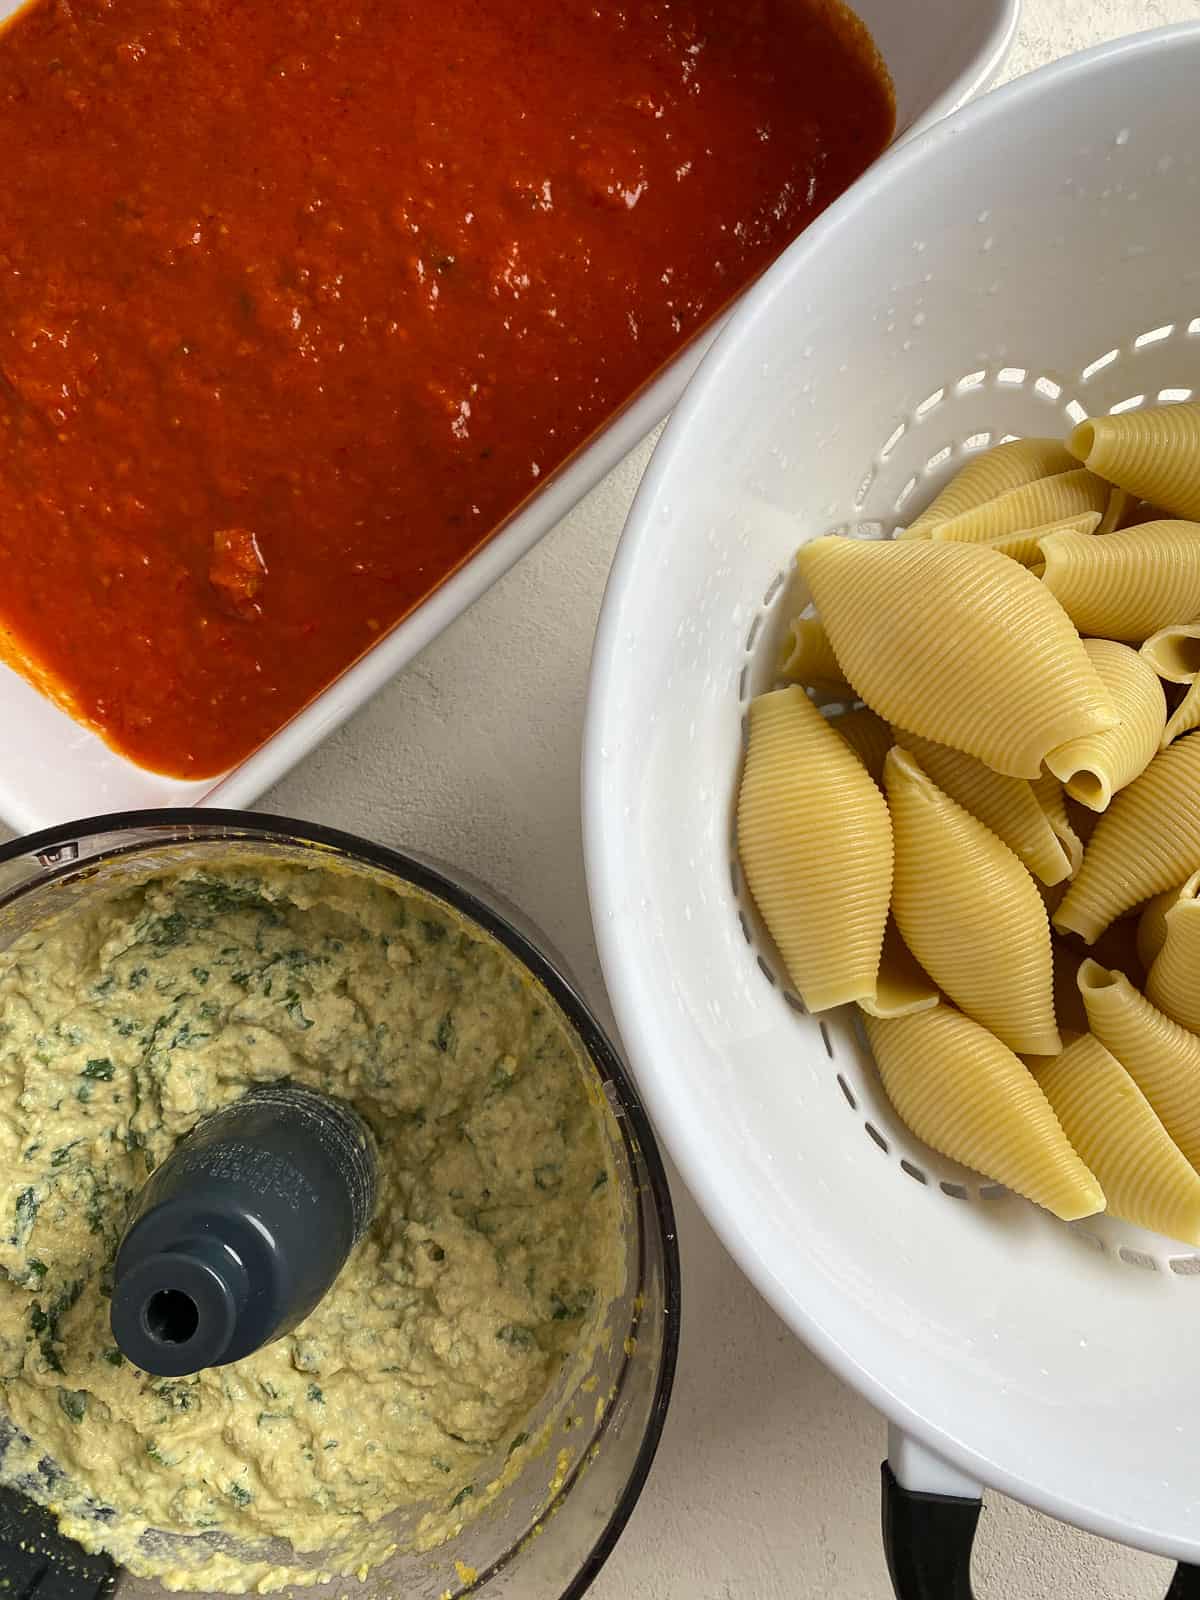 marinara sauce in baking tray alongside with colander of shells and food processor with stuffed shells mixture inside